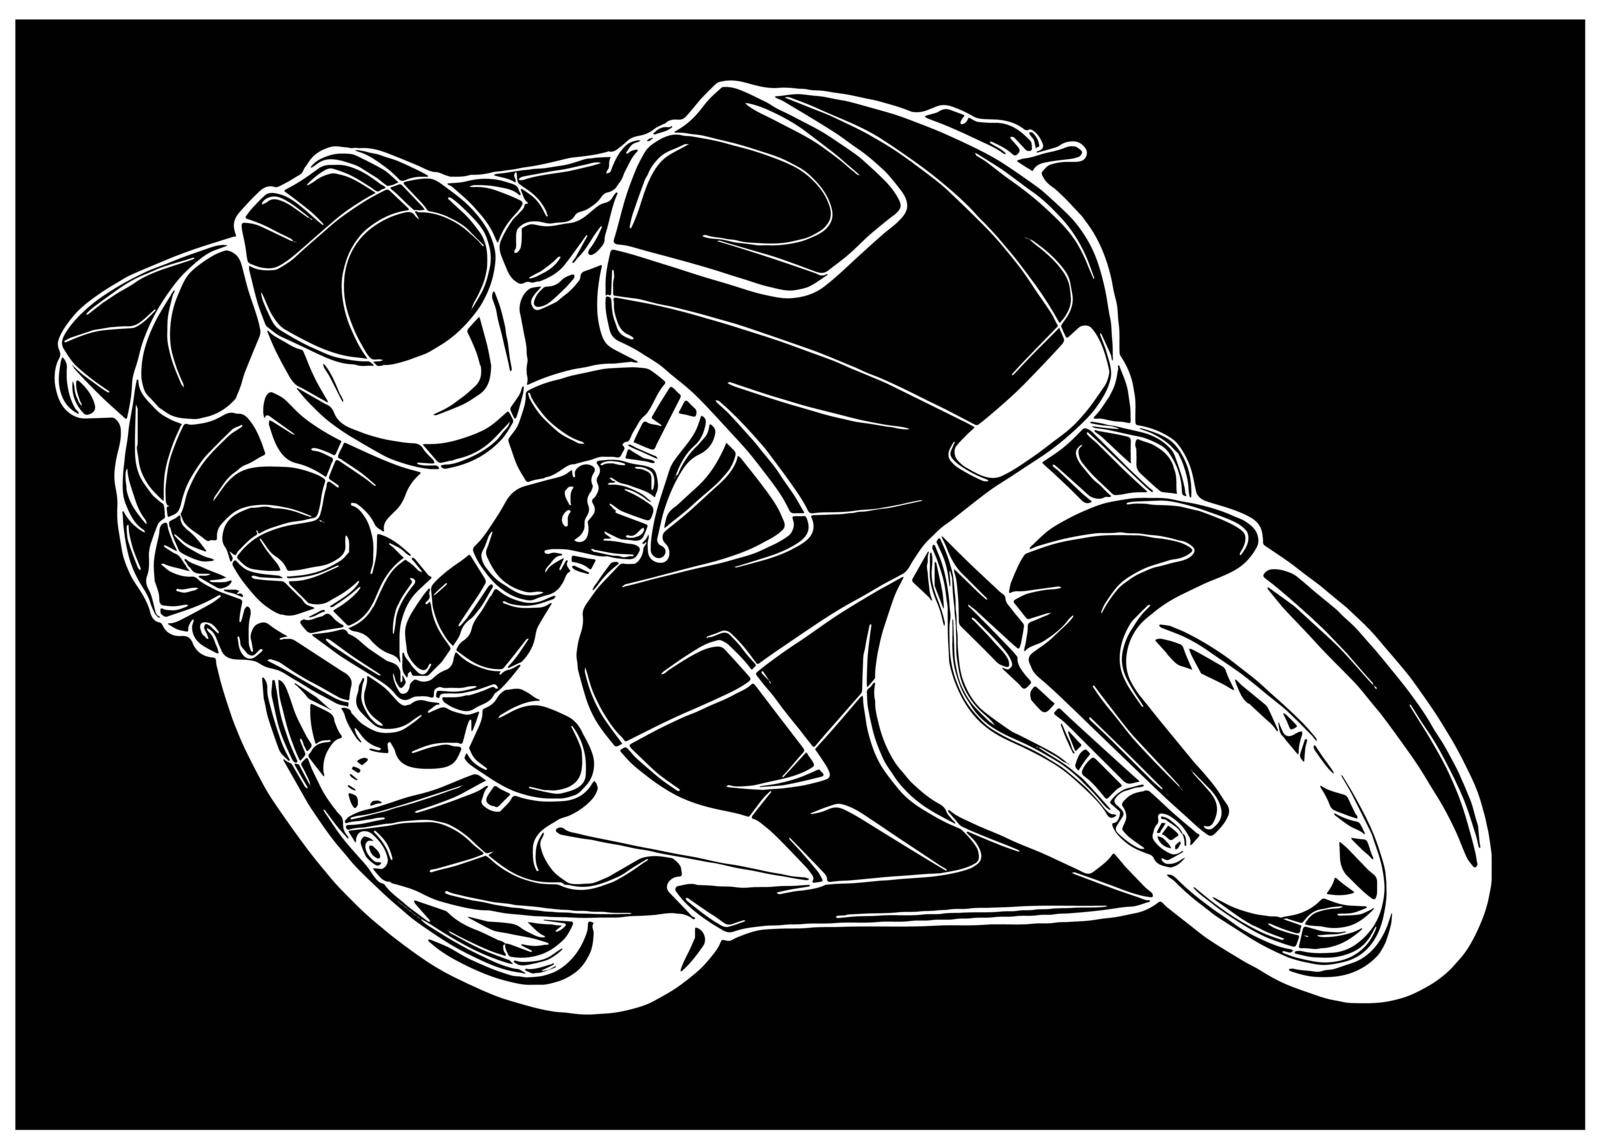 a Motorcycle racer sport vector illustration design by dean